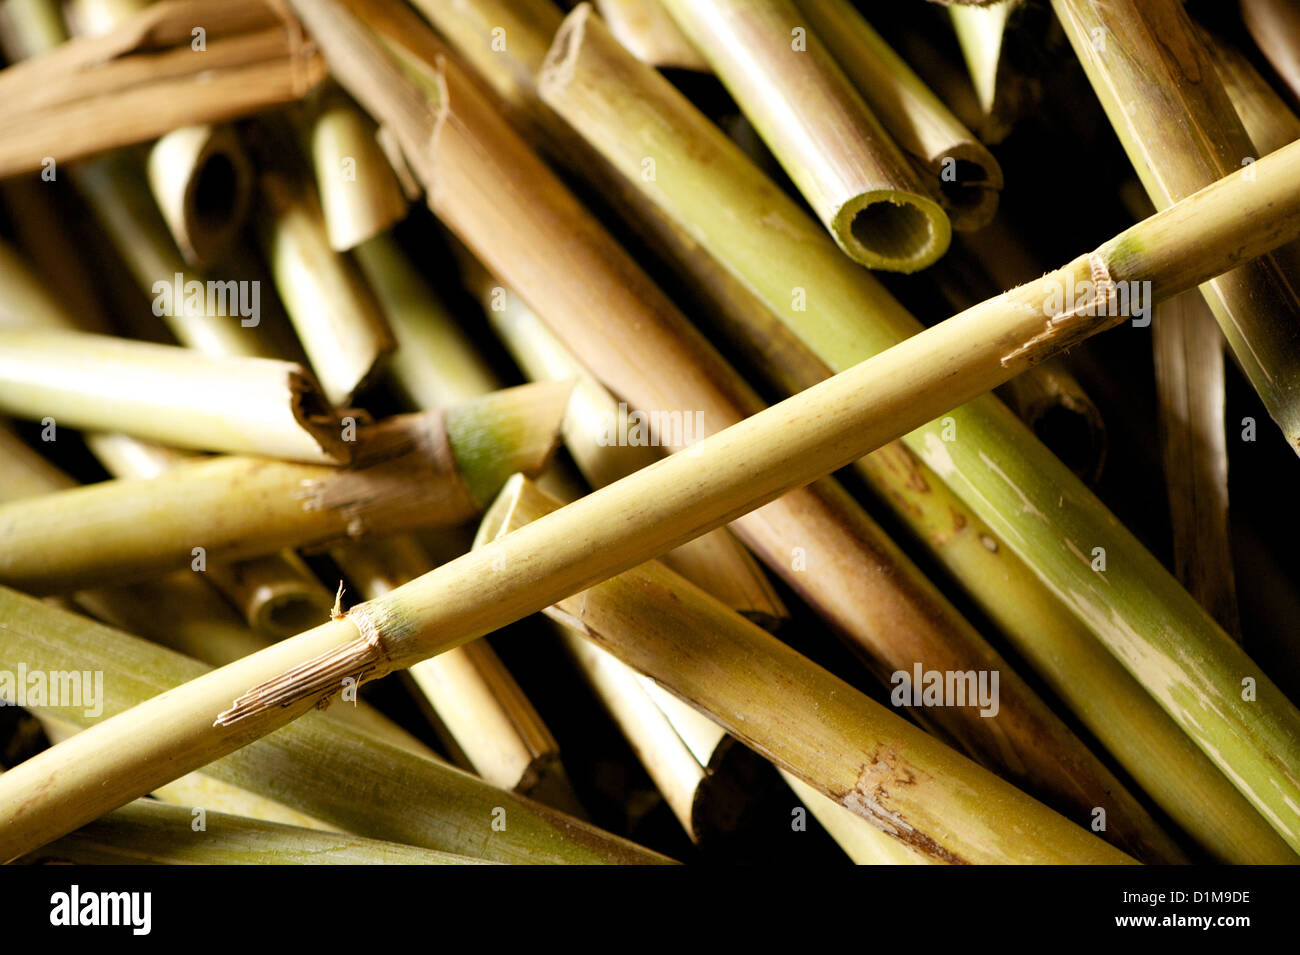 Cut river cane used in Catalonia, Spain for weaving matting which is sometimes used in ceilings, as well as for drying fruit Stock Photo